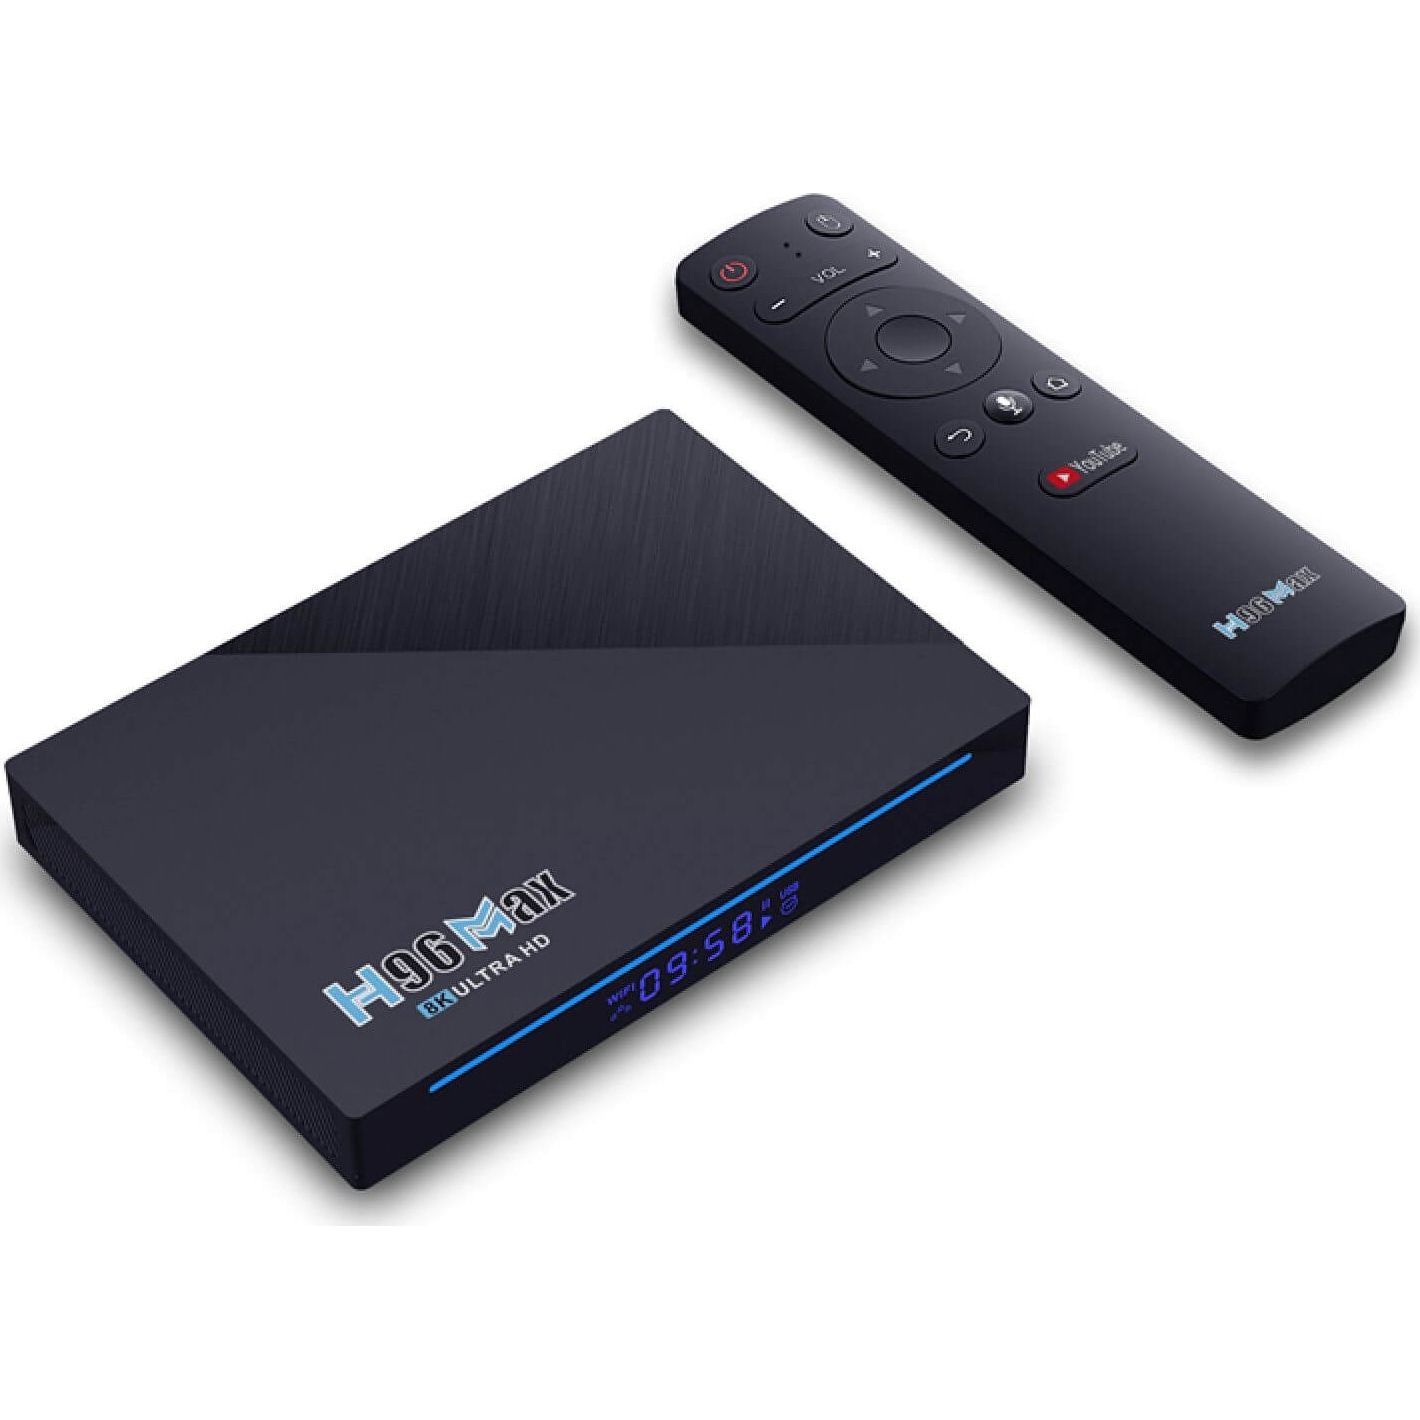 BSL ABSL-432 Android TV Box 4GB/32GB 4K HDR WiFi